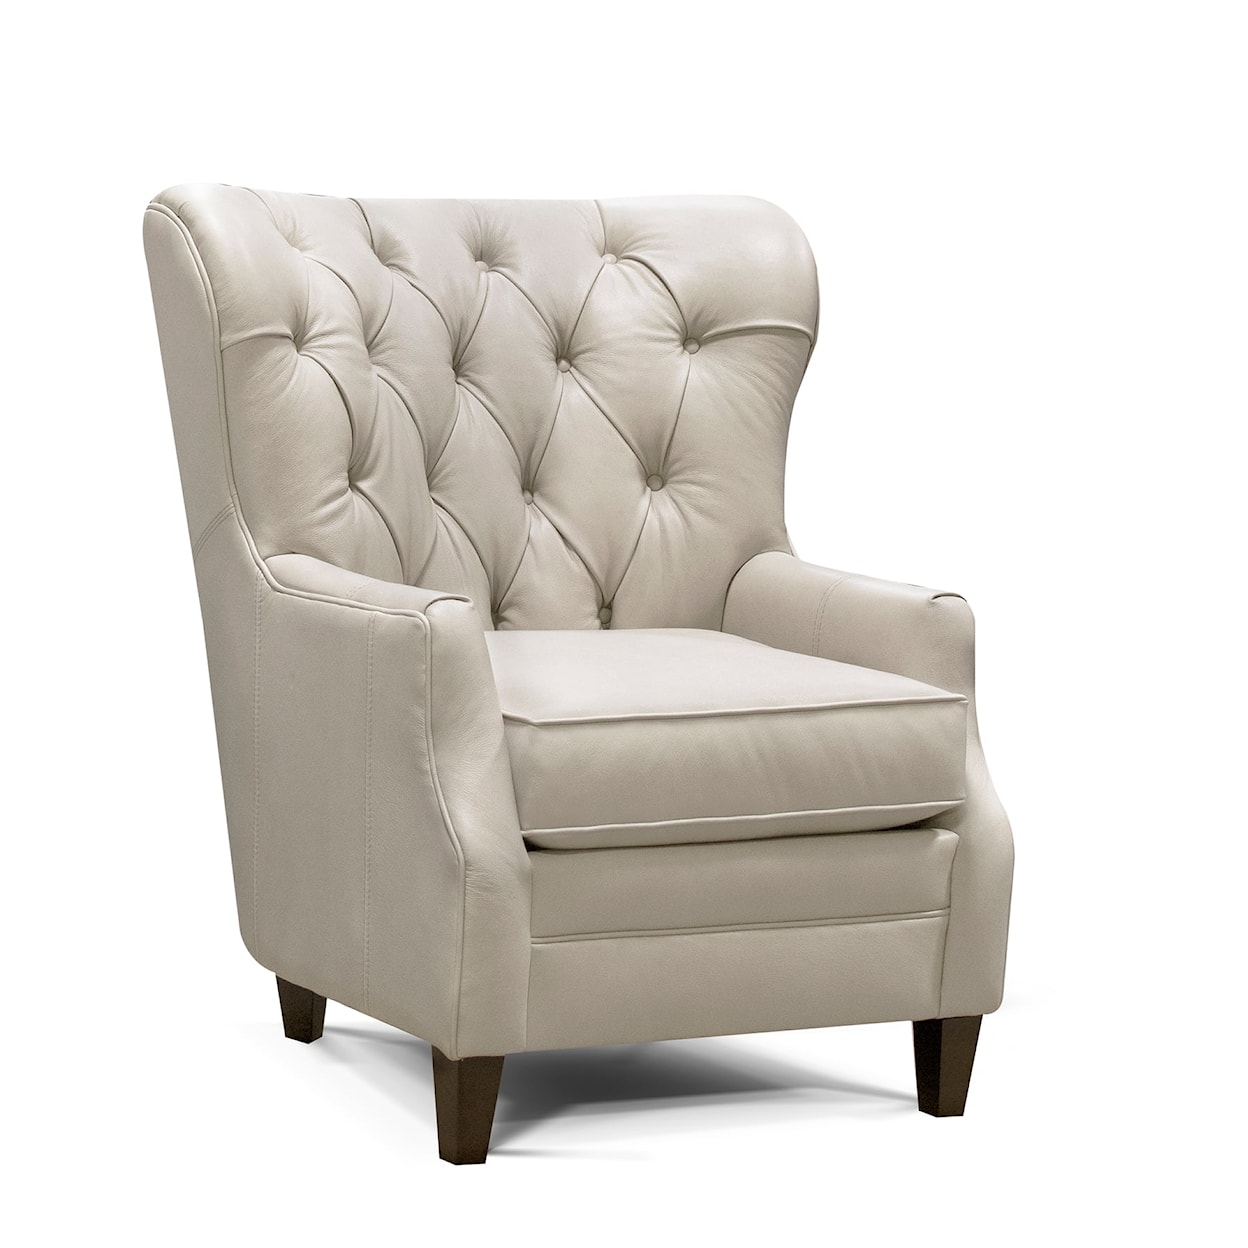 England 1180AL Series Wing Back Chair